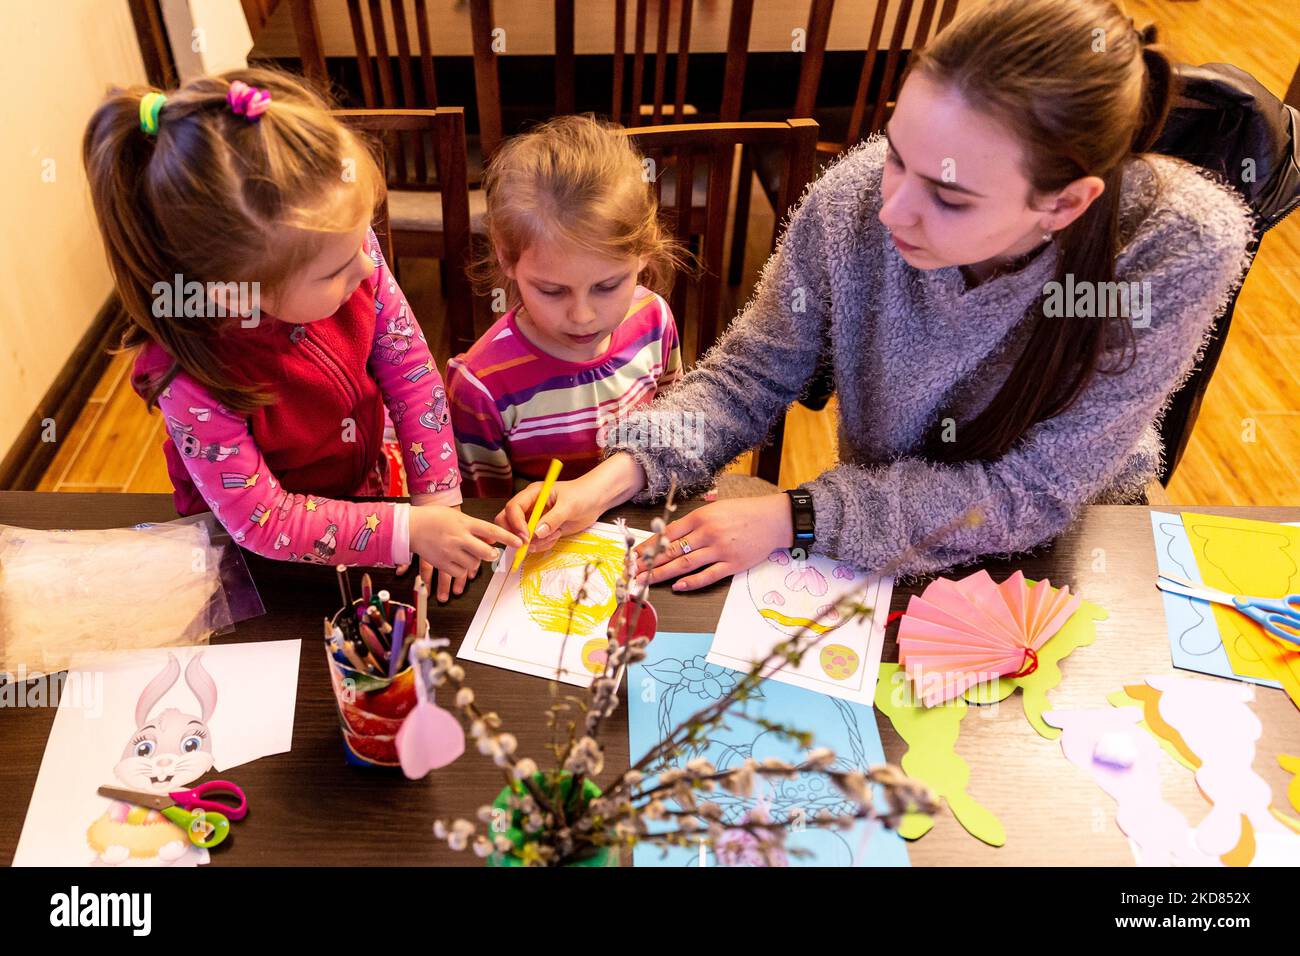 Ukrainian volunteer Krystyna prepares Easter decorations with domestic refugee children who escaped from Kharkiv area to relative safety of Nadyby, Lviv Oblast, Ukraine on April 21, 2022. Since the Russian Federation invaded Ukraine, the conflict forced over 10 million people to flee their homes, both internally and externally. Greek-Catholic Church in Nadyby near Lviv hosts dozens of mothers with children who fled the war in eastern part of Ukraine and supports many more refugees in the area. The families found shelter in the Center for the Pastoral Care of Priests and Monks in Nadyby. (Photo Stock Photo